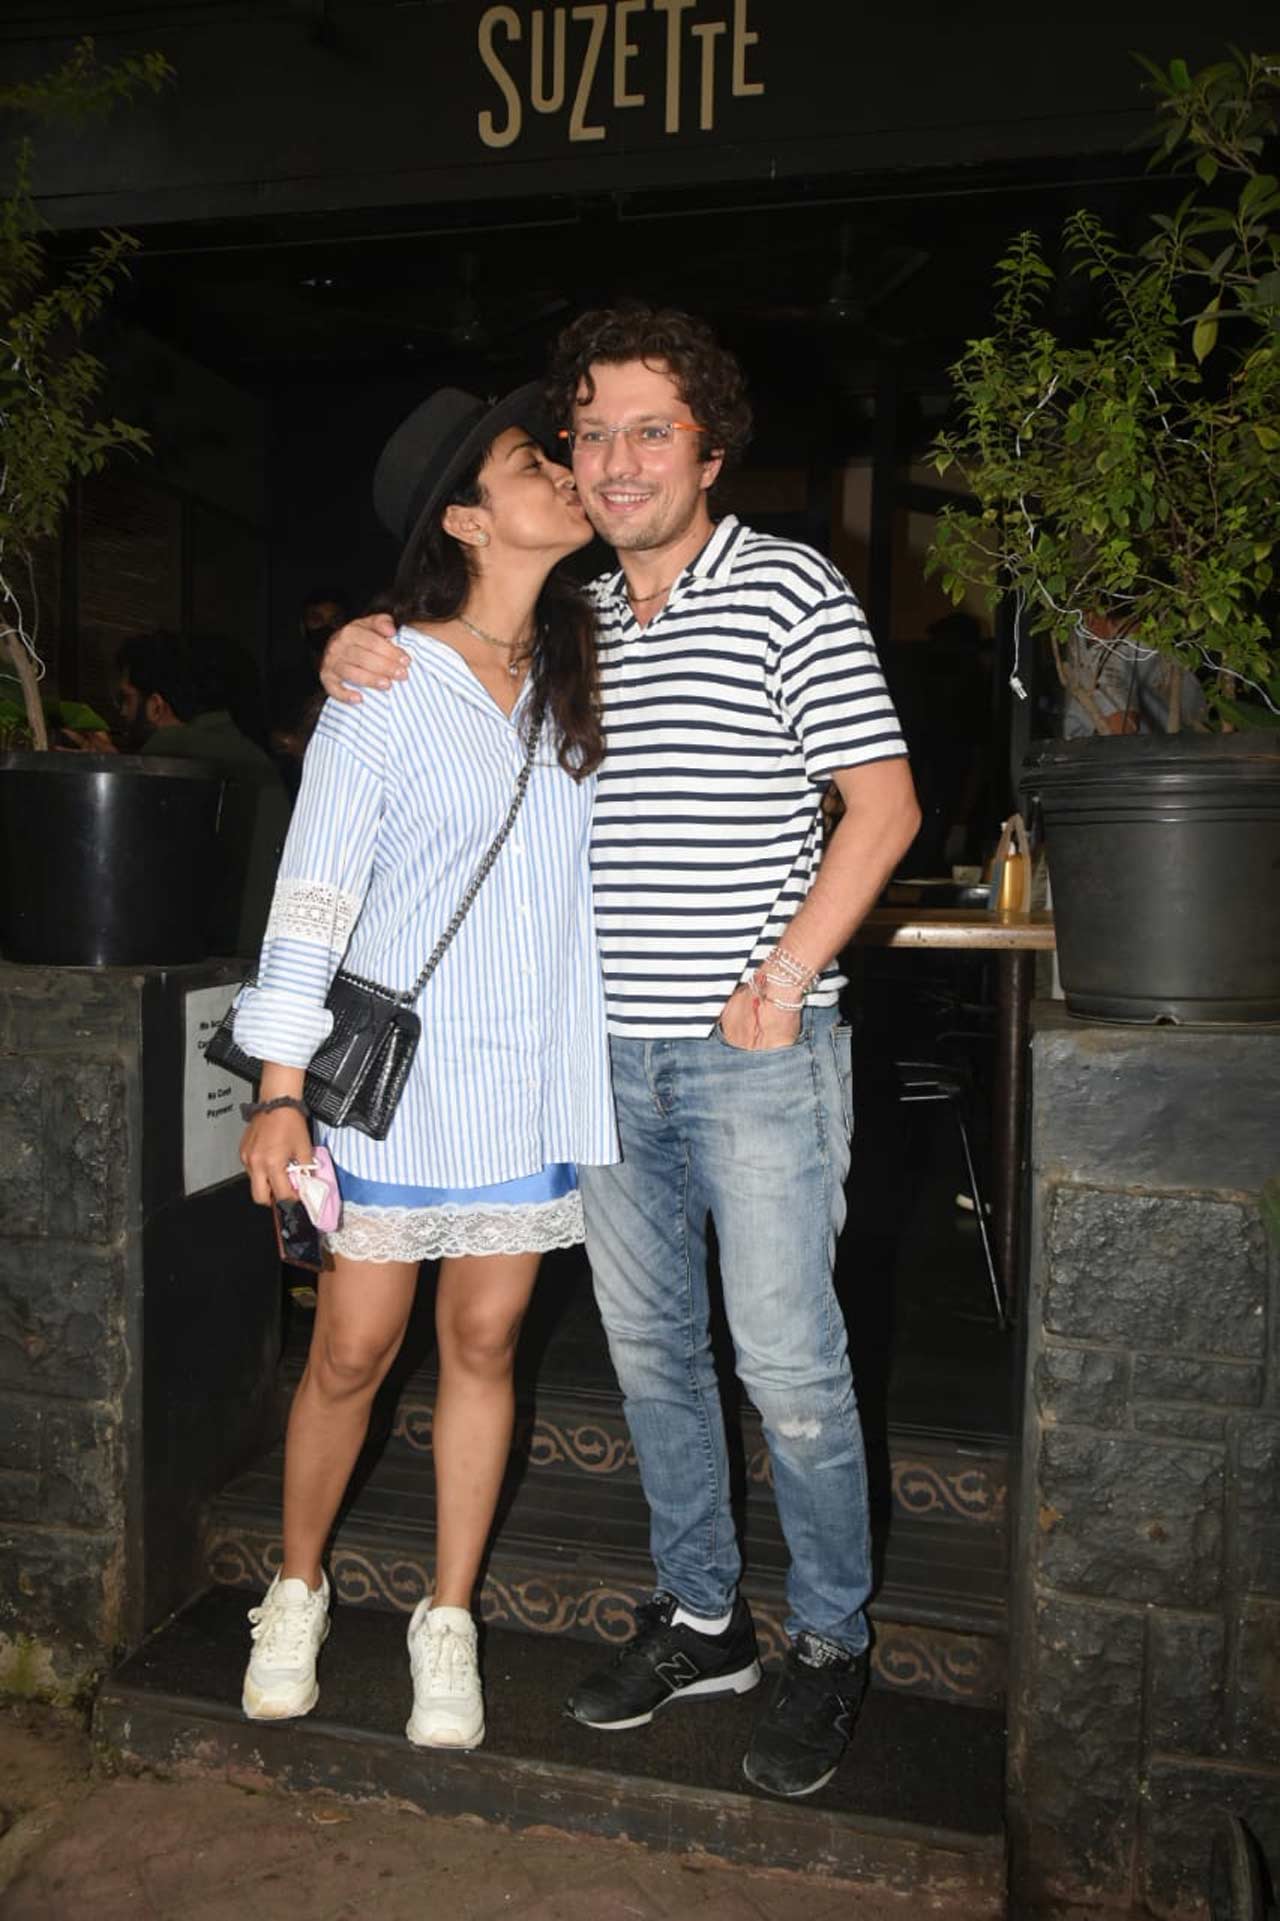 Shriya Saran and Andrei Koscheev were clicked in PDA, as they stepped out in Bandra, Mumbai. Shriya was seen wearing a denim skirt, which she paired with a white shirt.